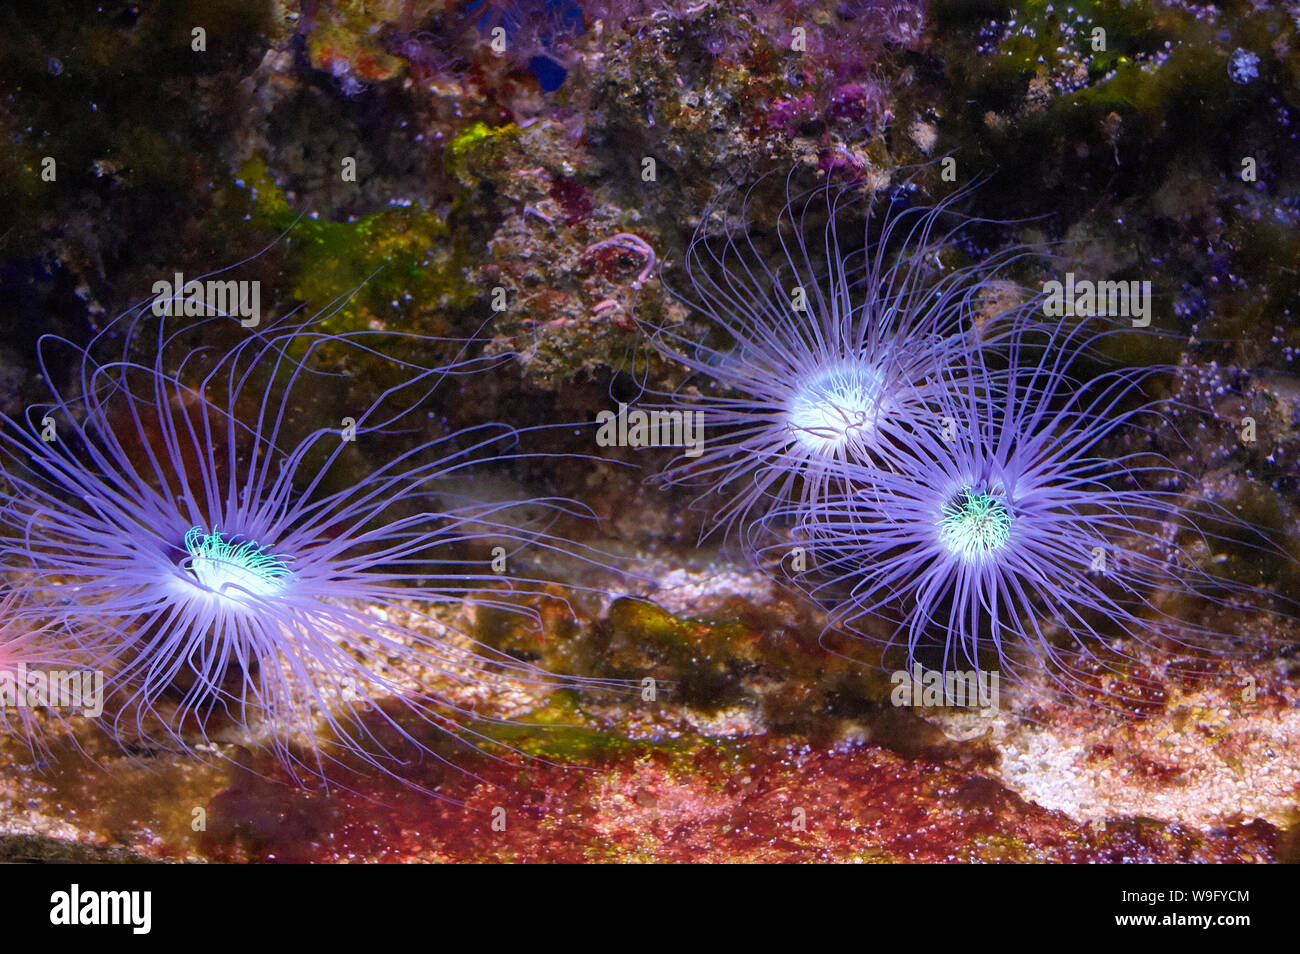 Glowing Fluorescent Blue Coral Reef Anemone Stock Photo